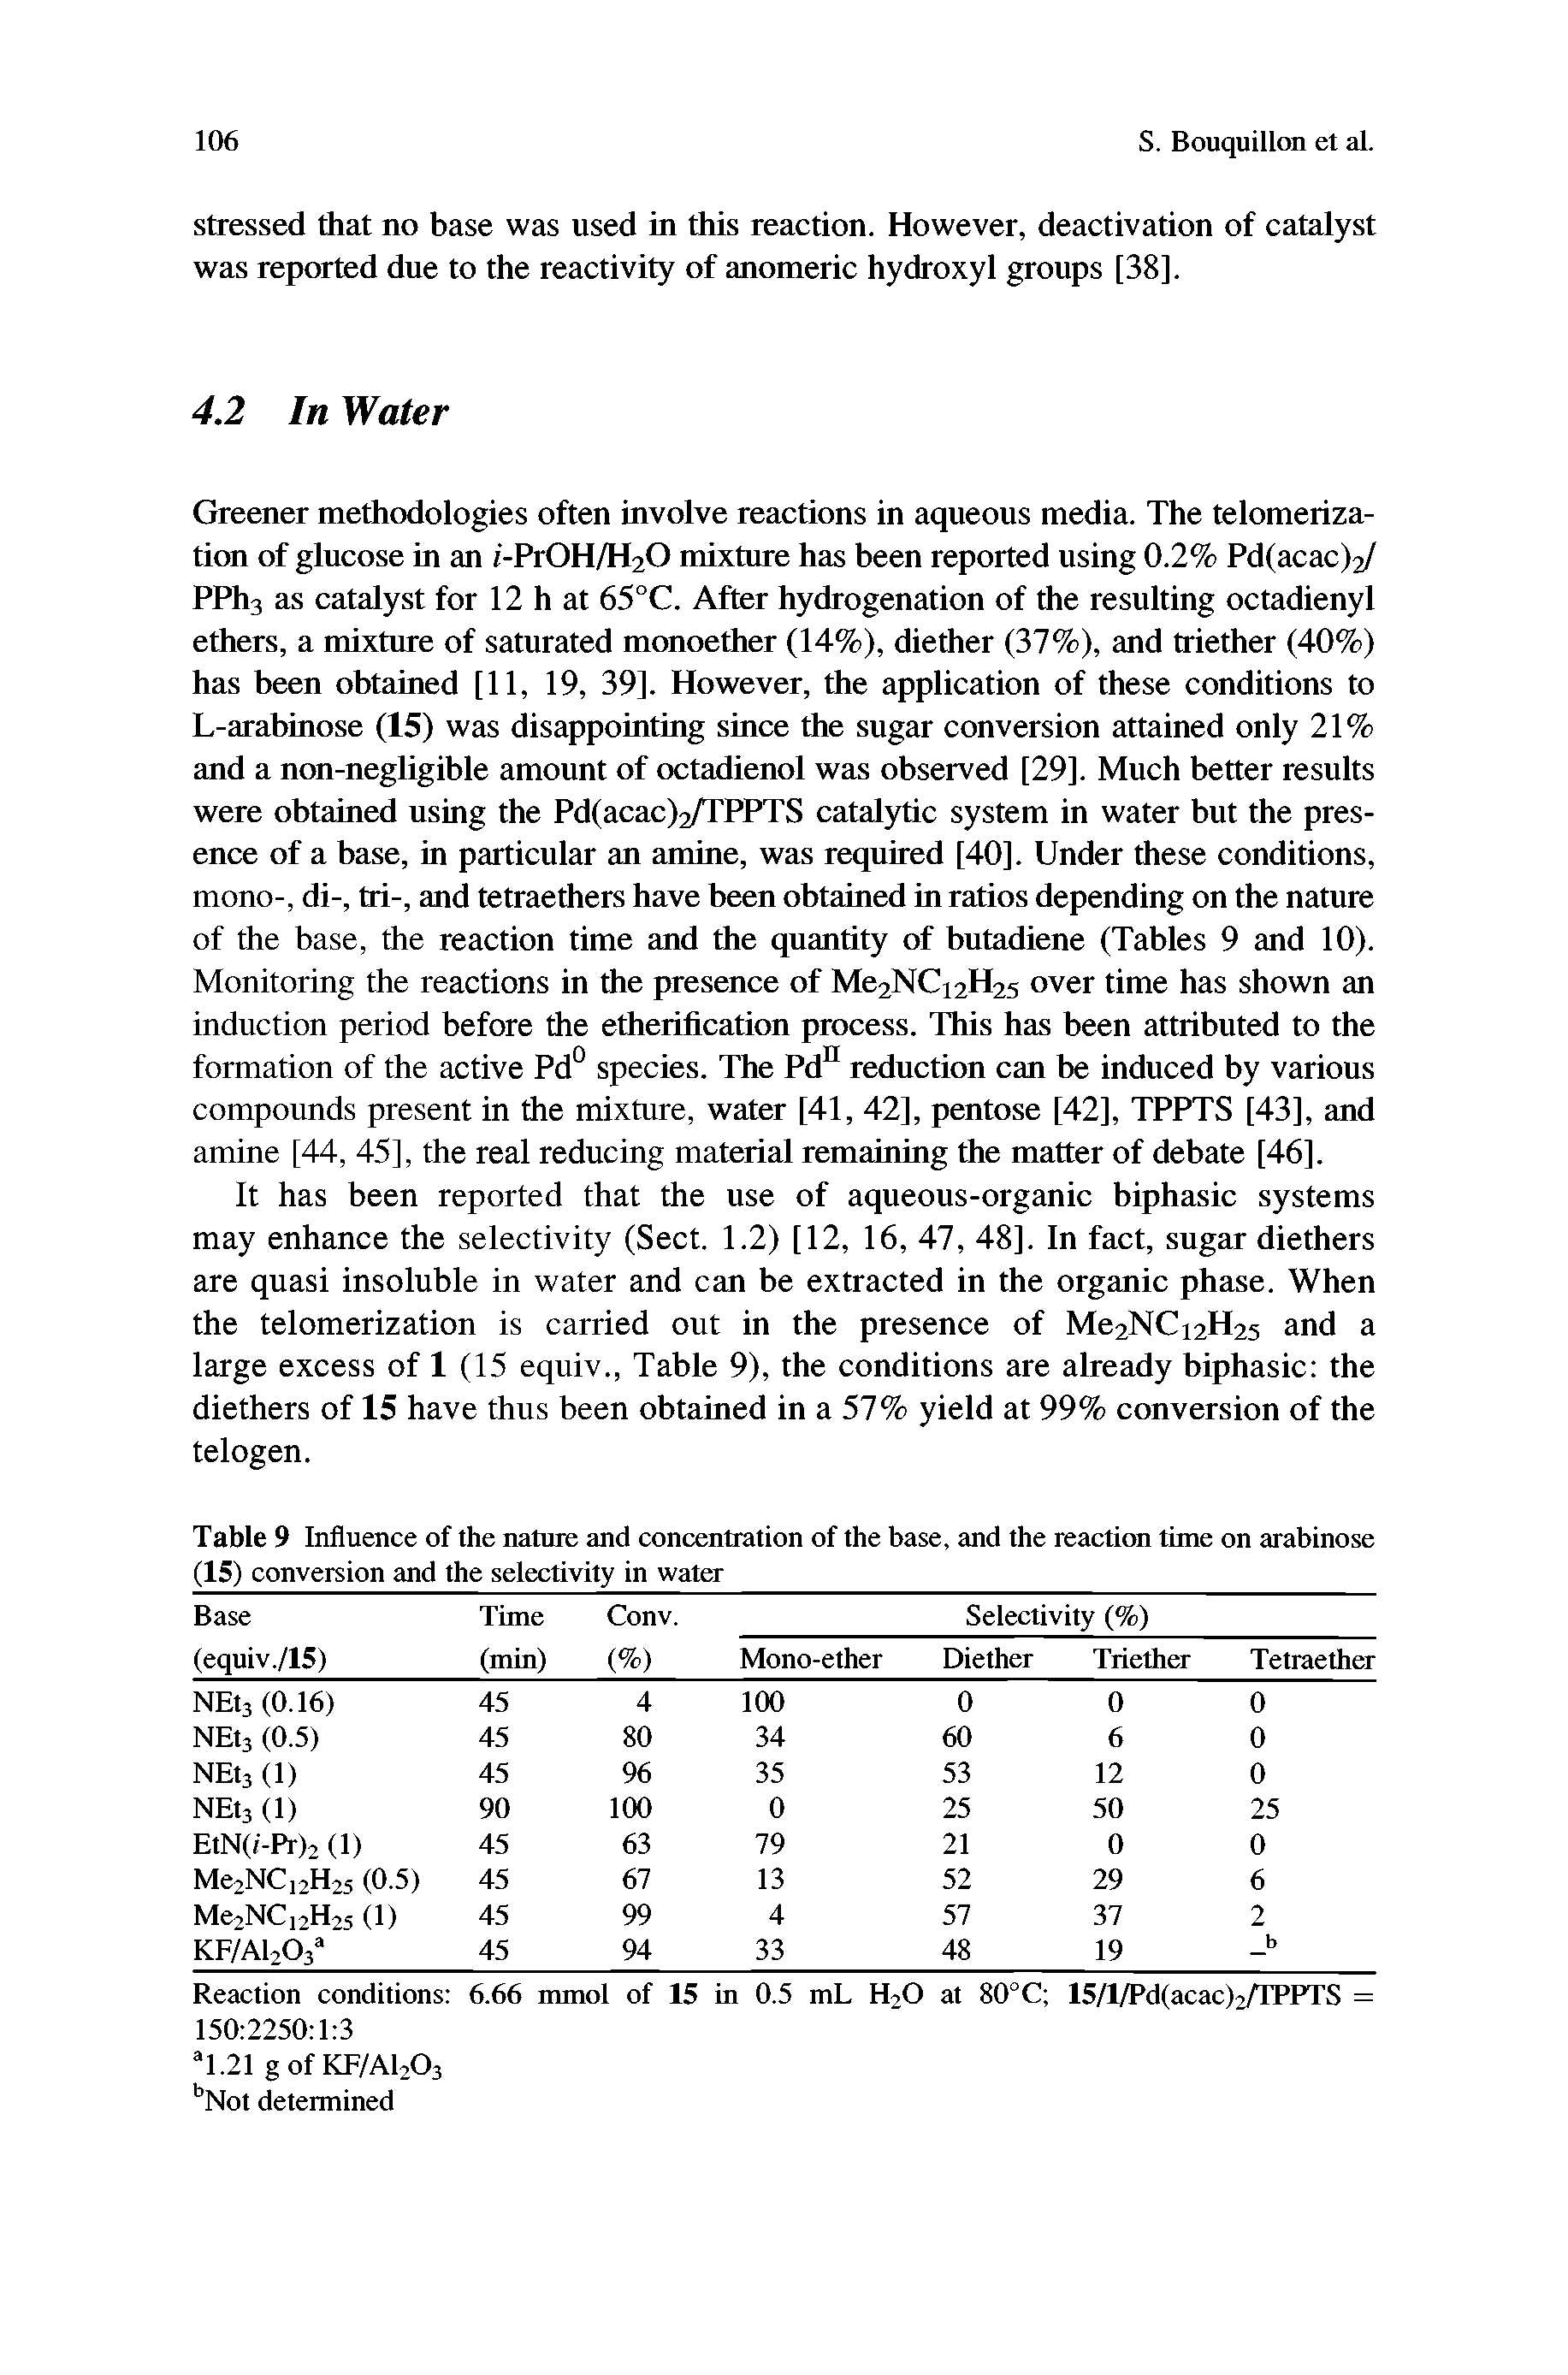 Table 9 Influence of the nature and concentration of the base, and the reaction time on arabinose (15) conversion and the selectivity in water...